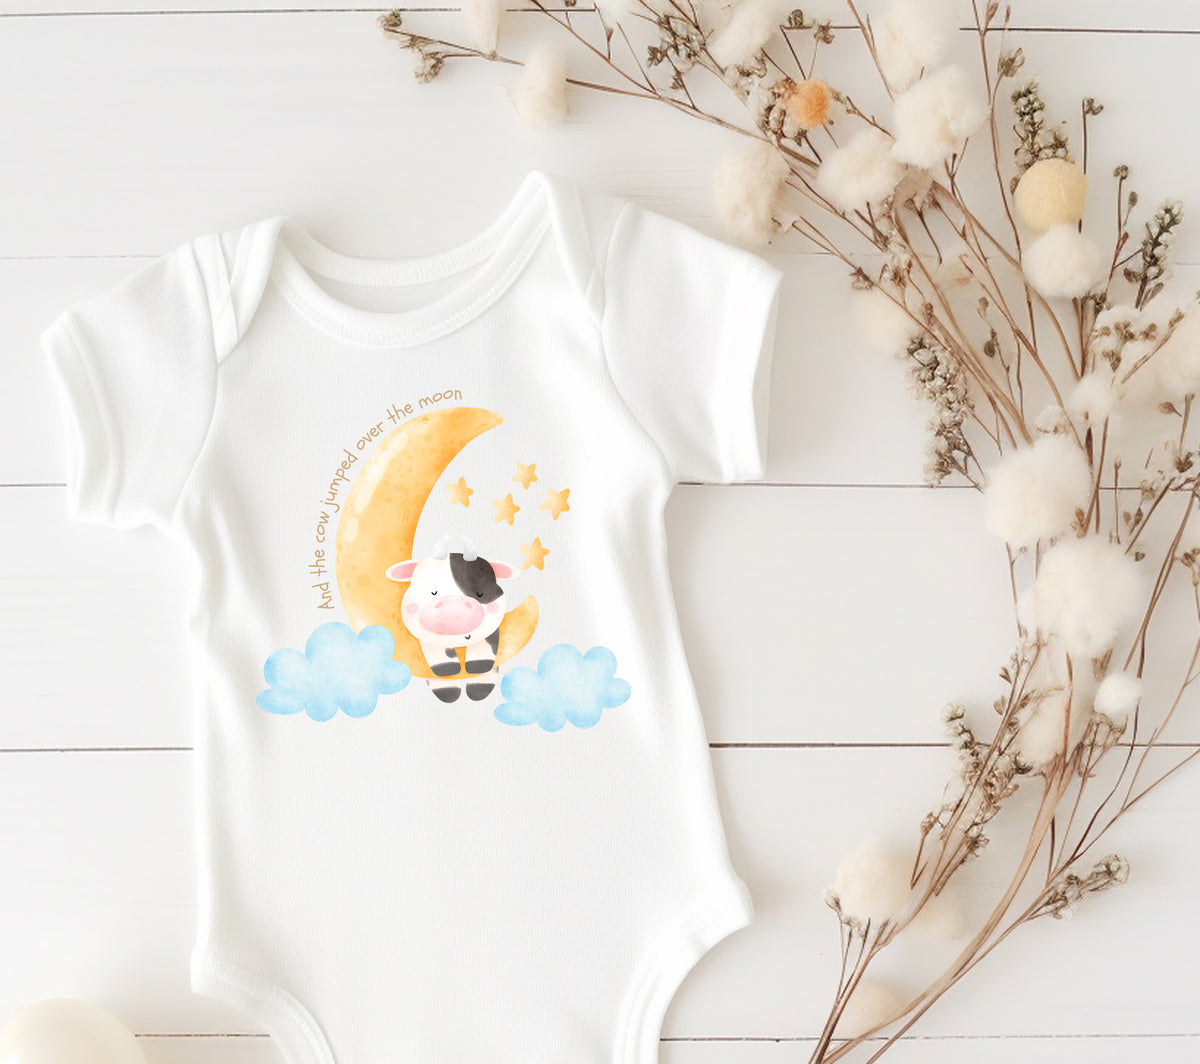 Nursery themed Baby Vest - Cow jumped over the moon